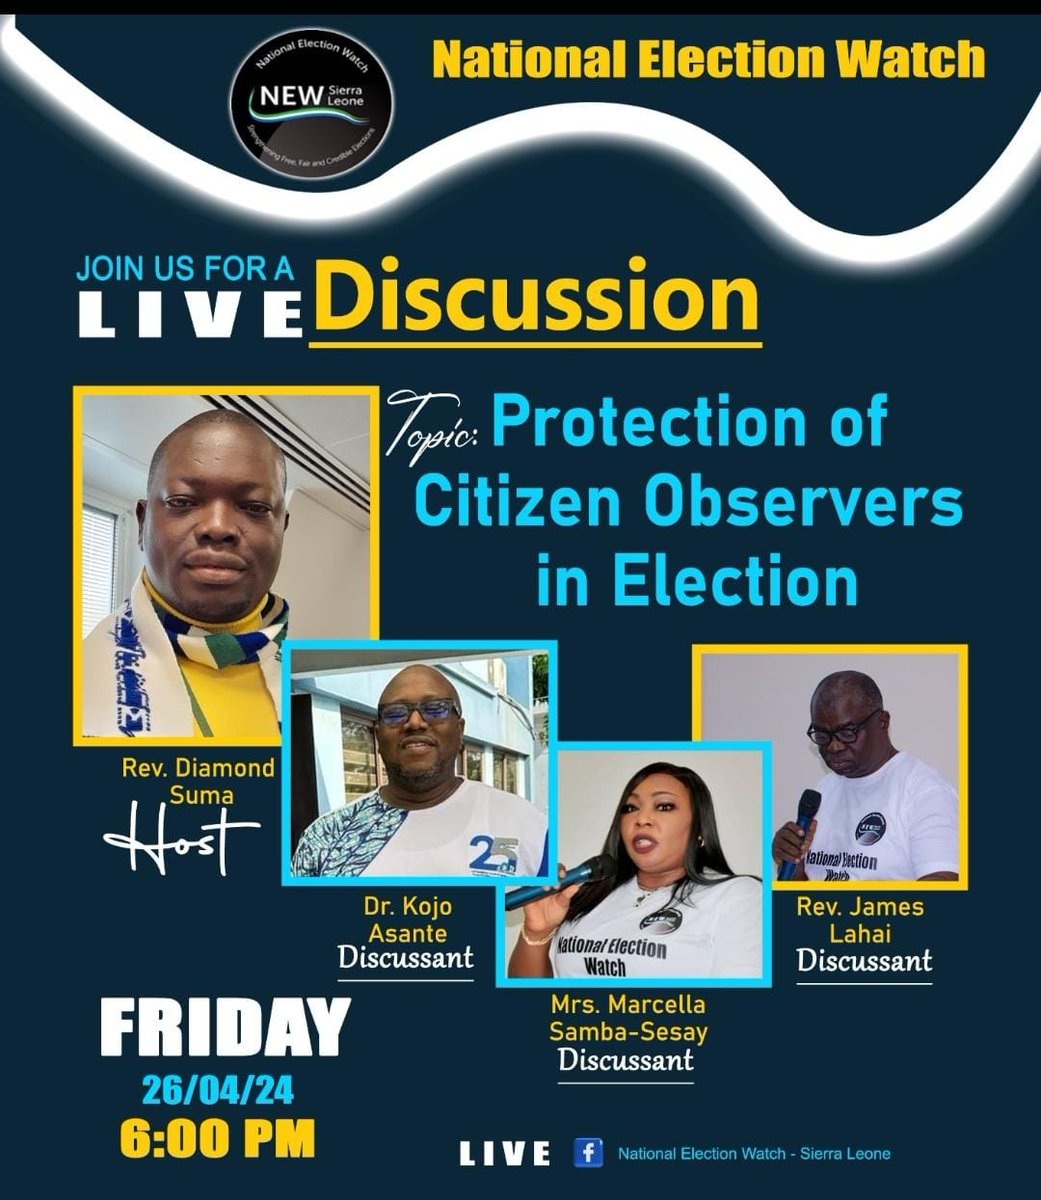 Don’t miss out on the upcoming discussion featuring Dr. @KojoPumpuni, our Director for Advocacy and Policy Engagement, along with other distinguished discussants. We'll be exploring the vital topic of 'Protection of Citizen Observers in Elections'. Be sure to mark your calendar…